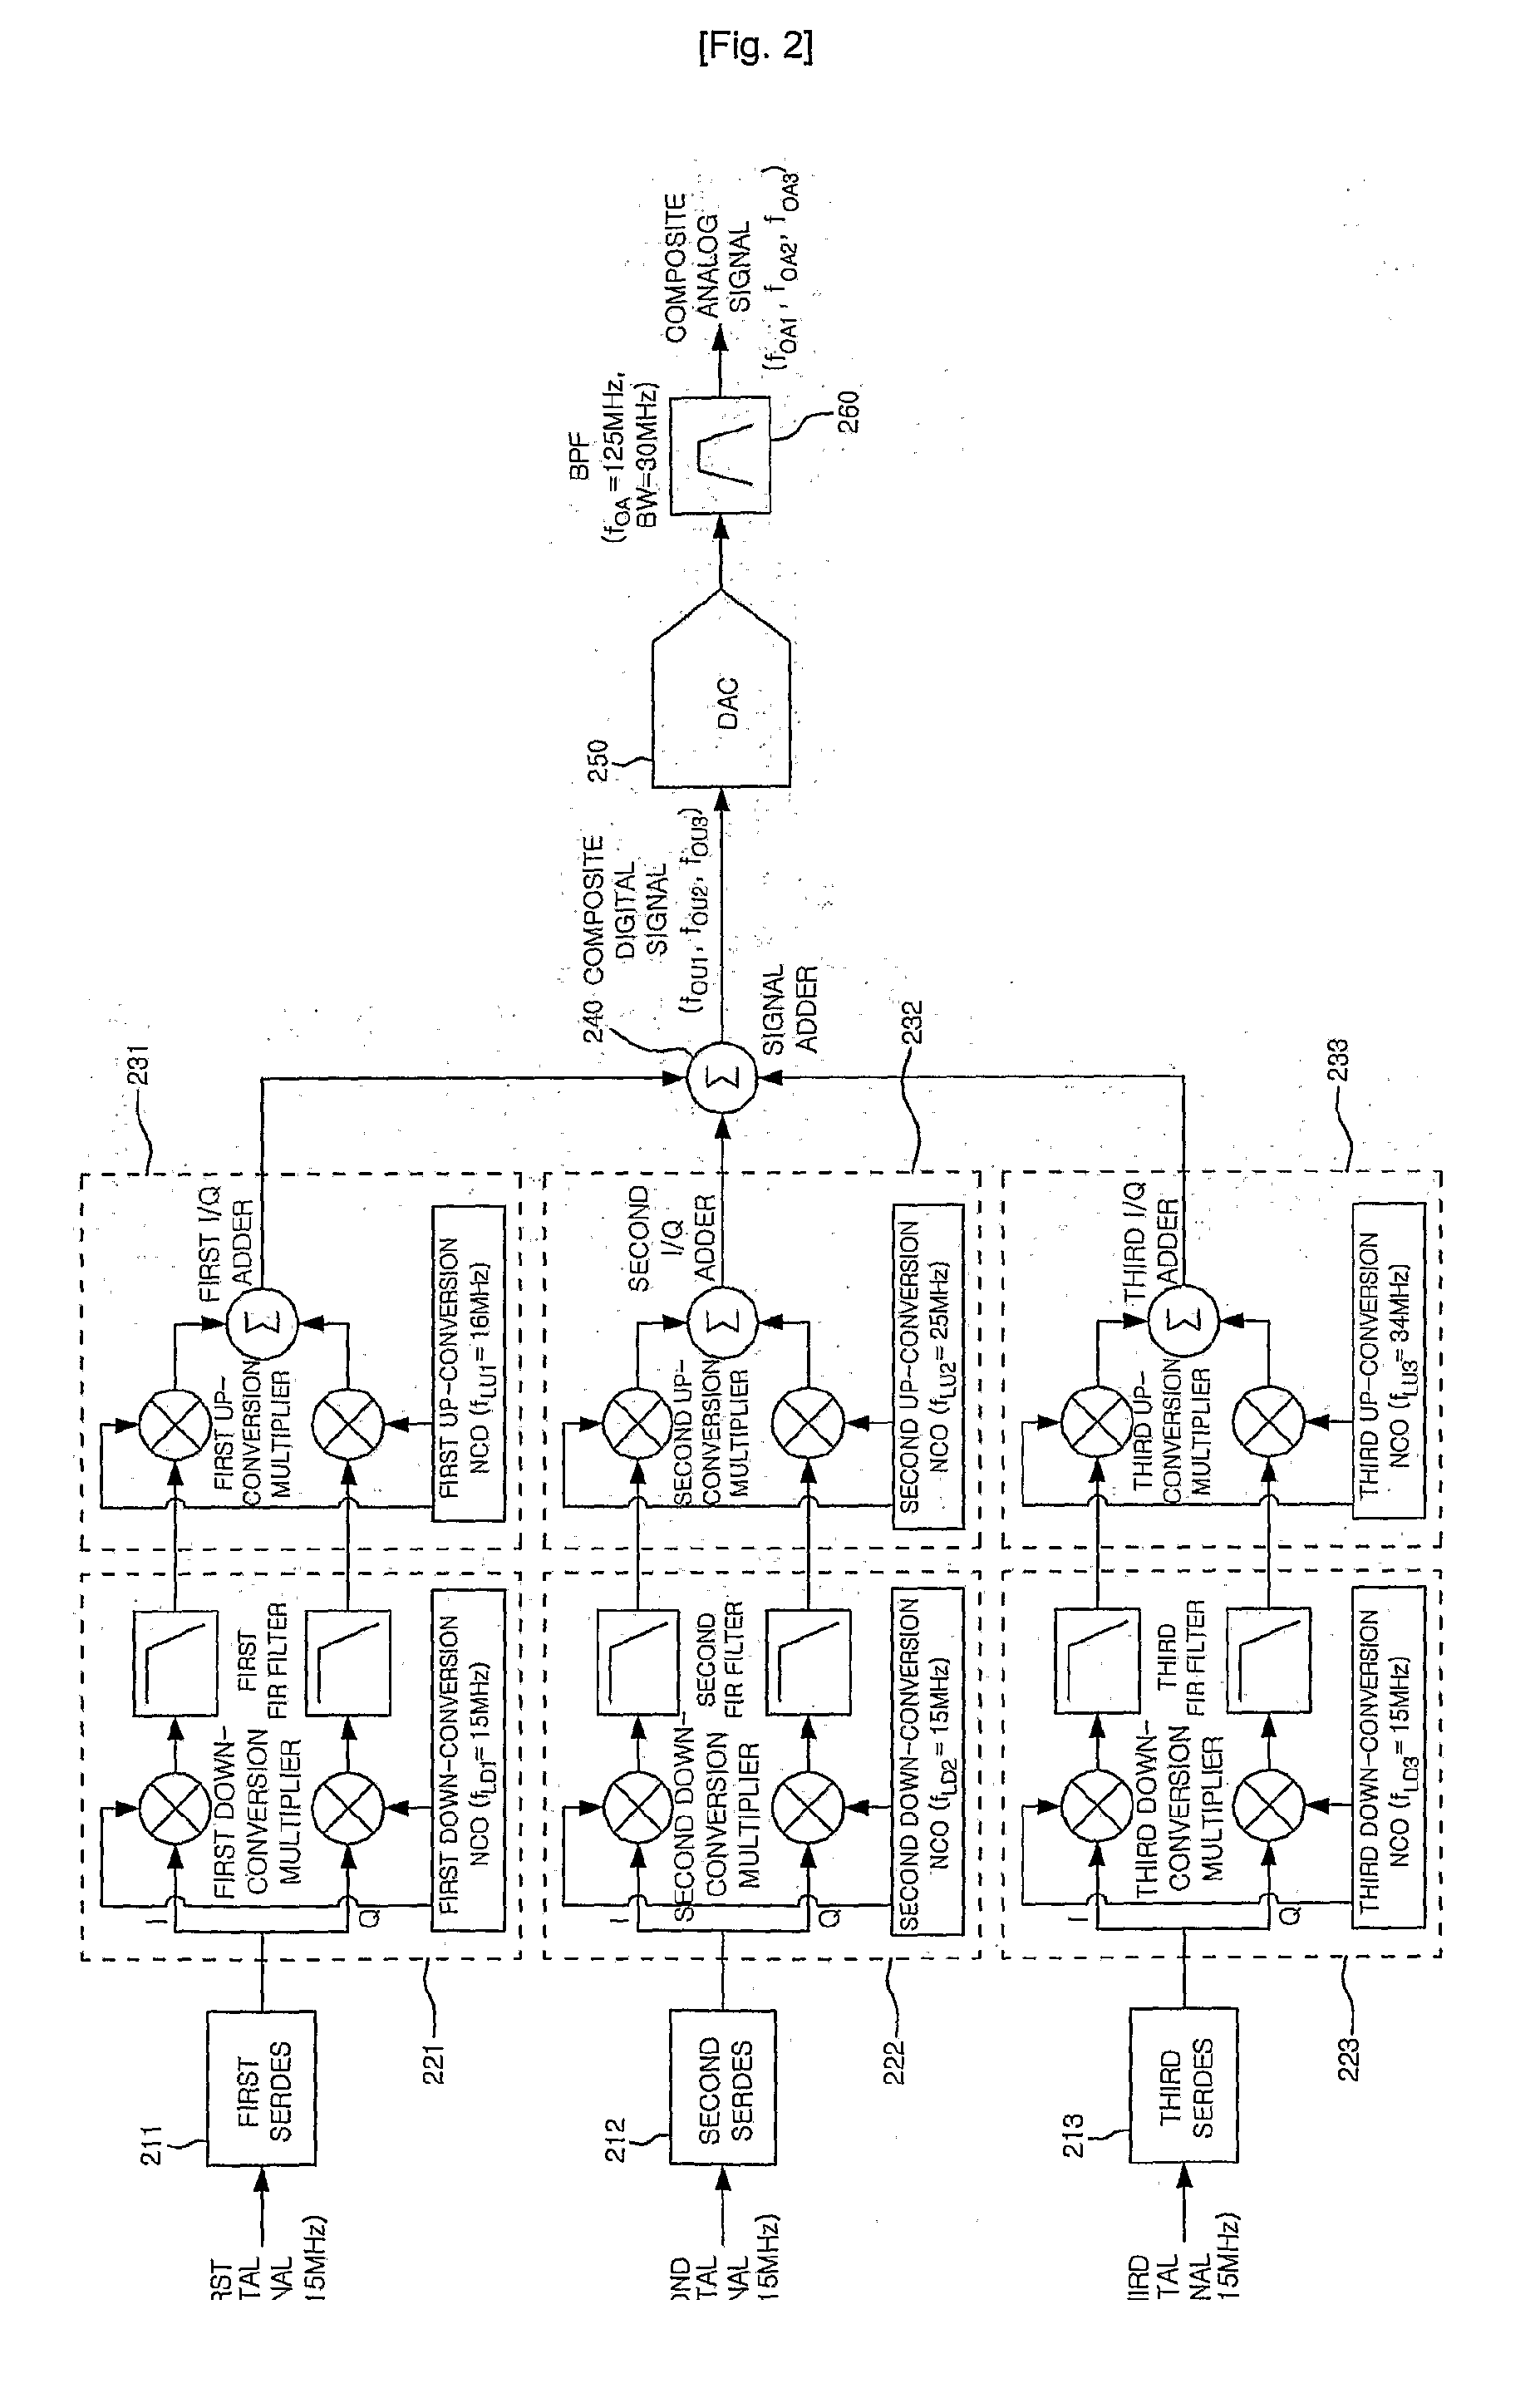 Apparatus and method for digital frequency up-conversion